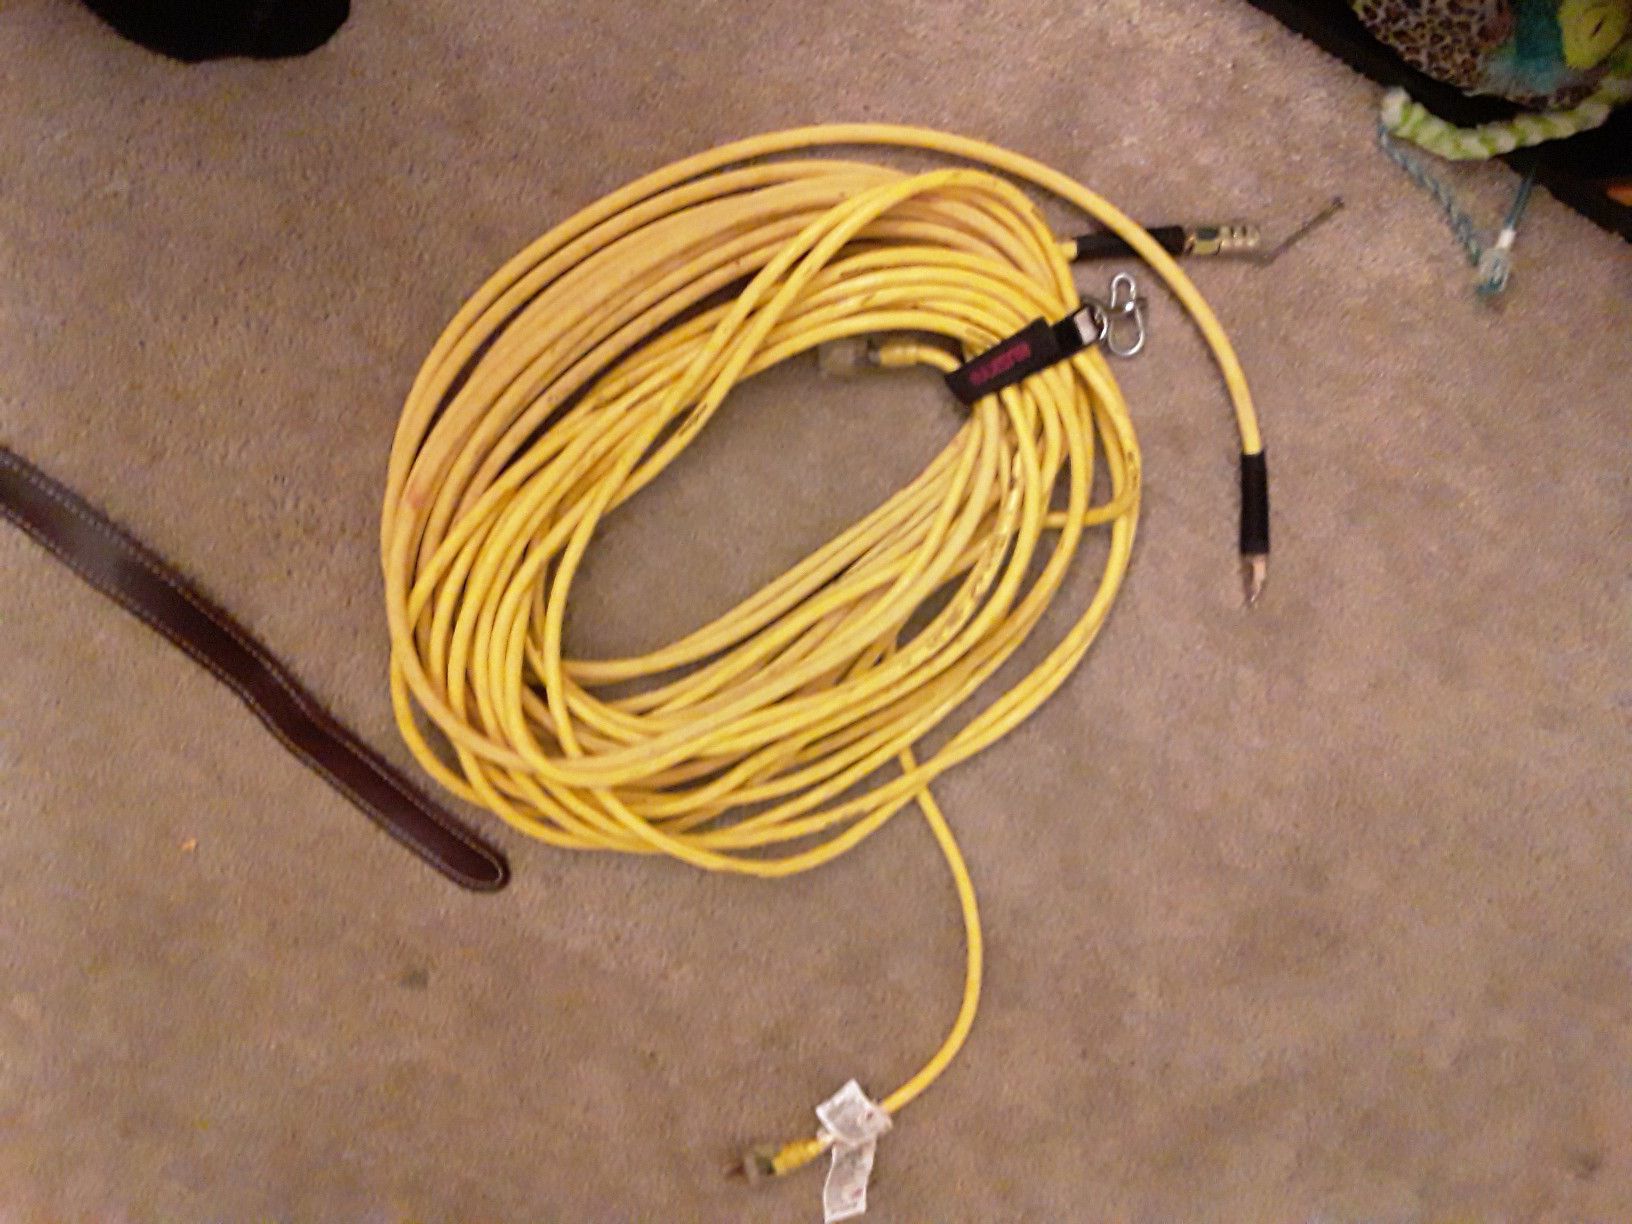 New 50 foot hose and 50 foot 12 gauge extension